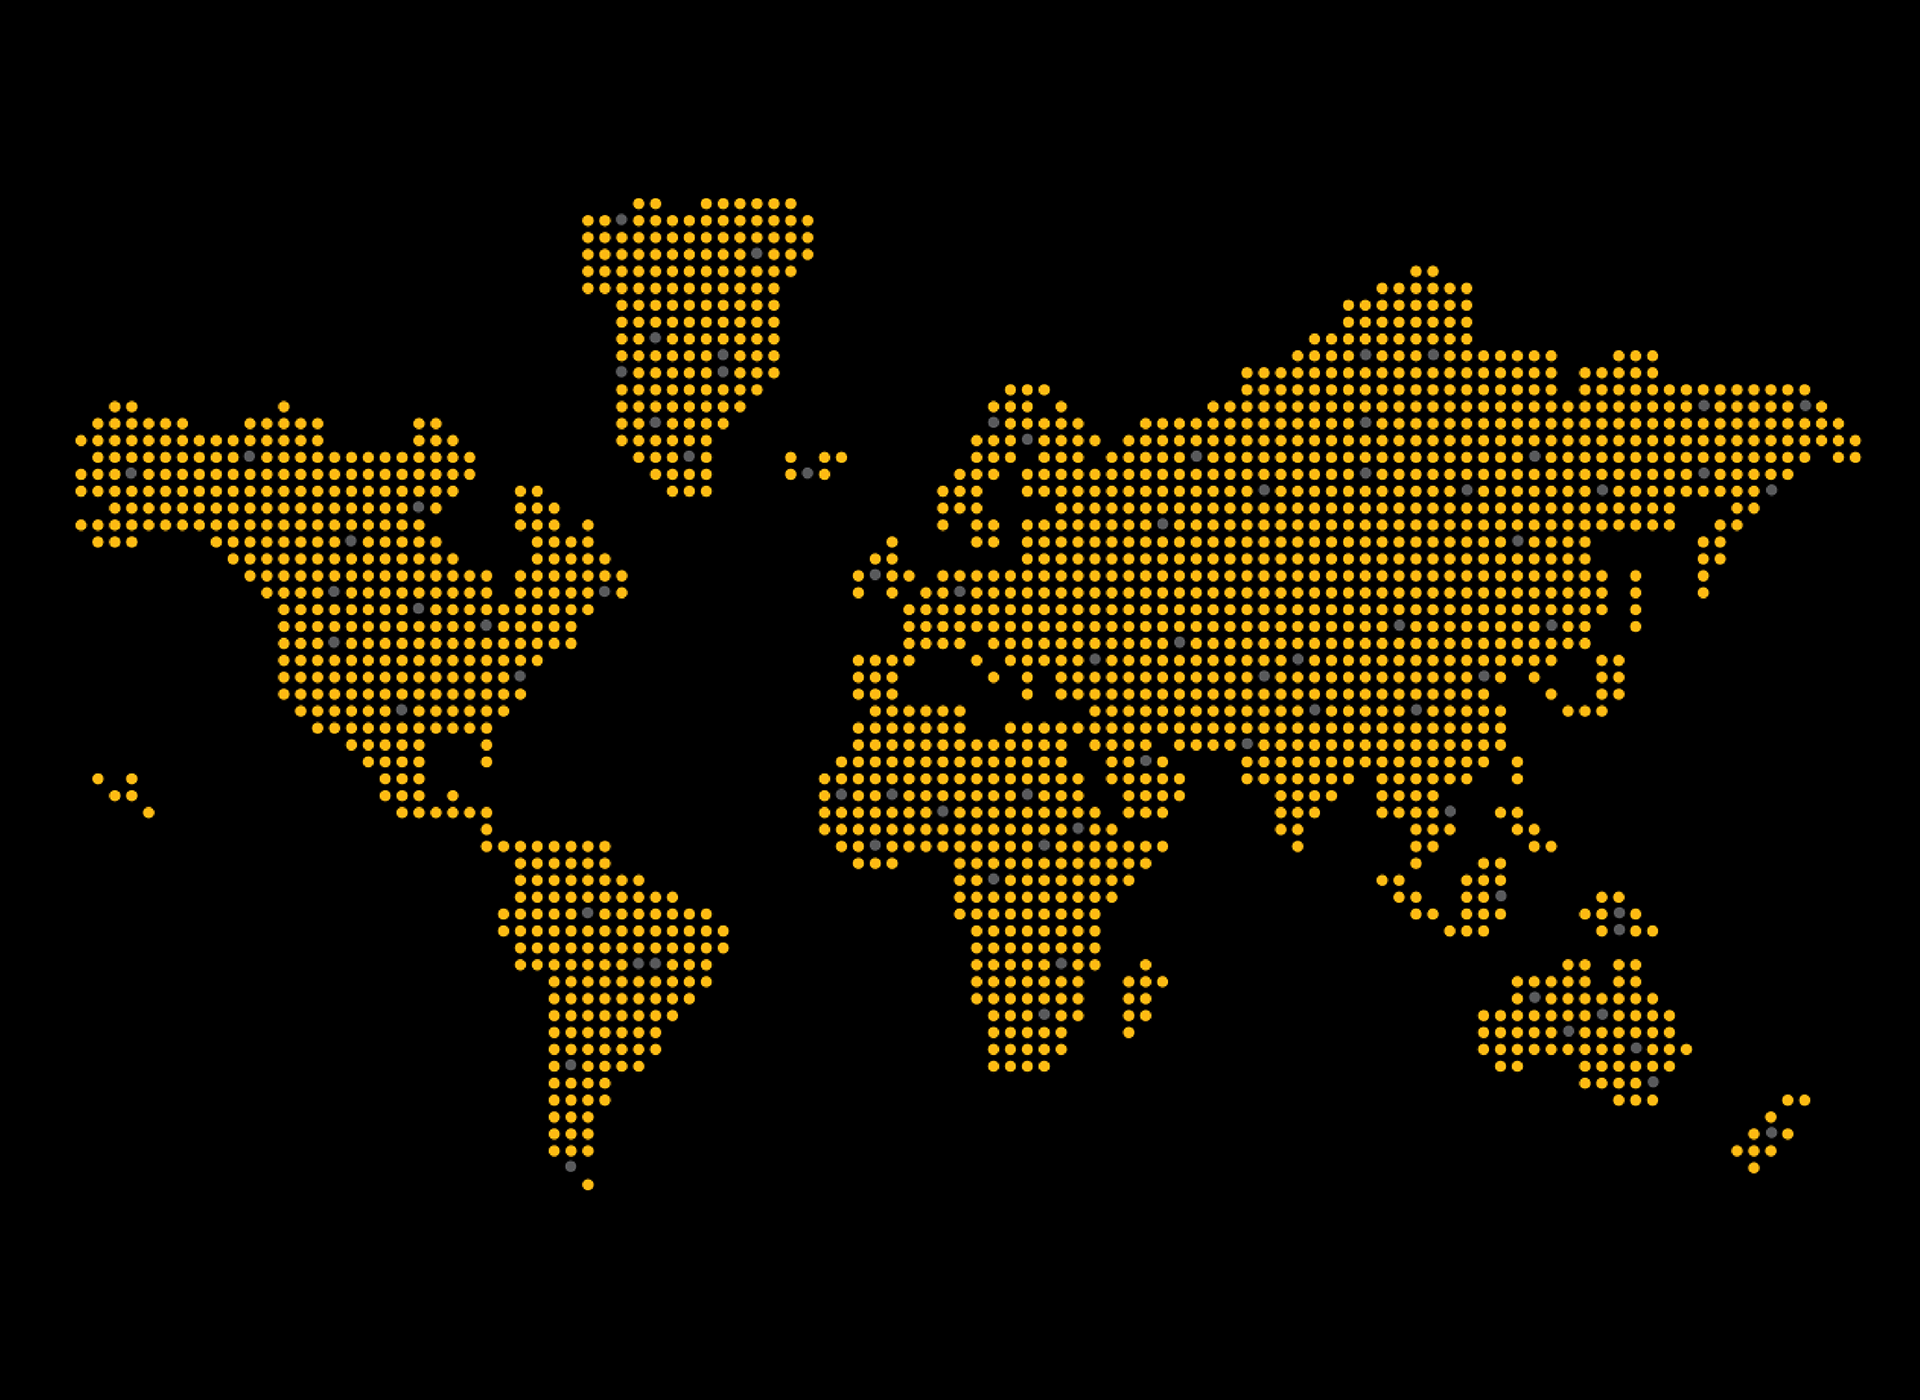 Digital map of the world continents